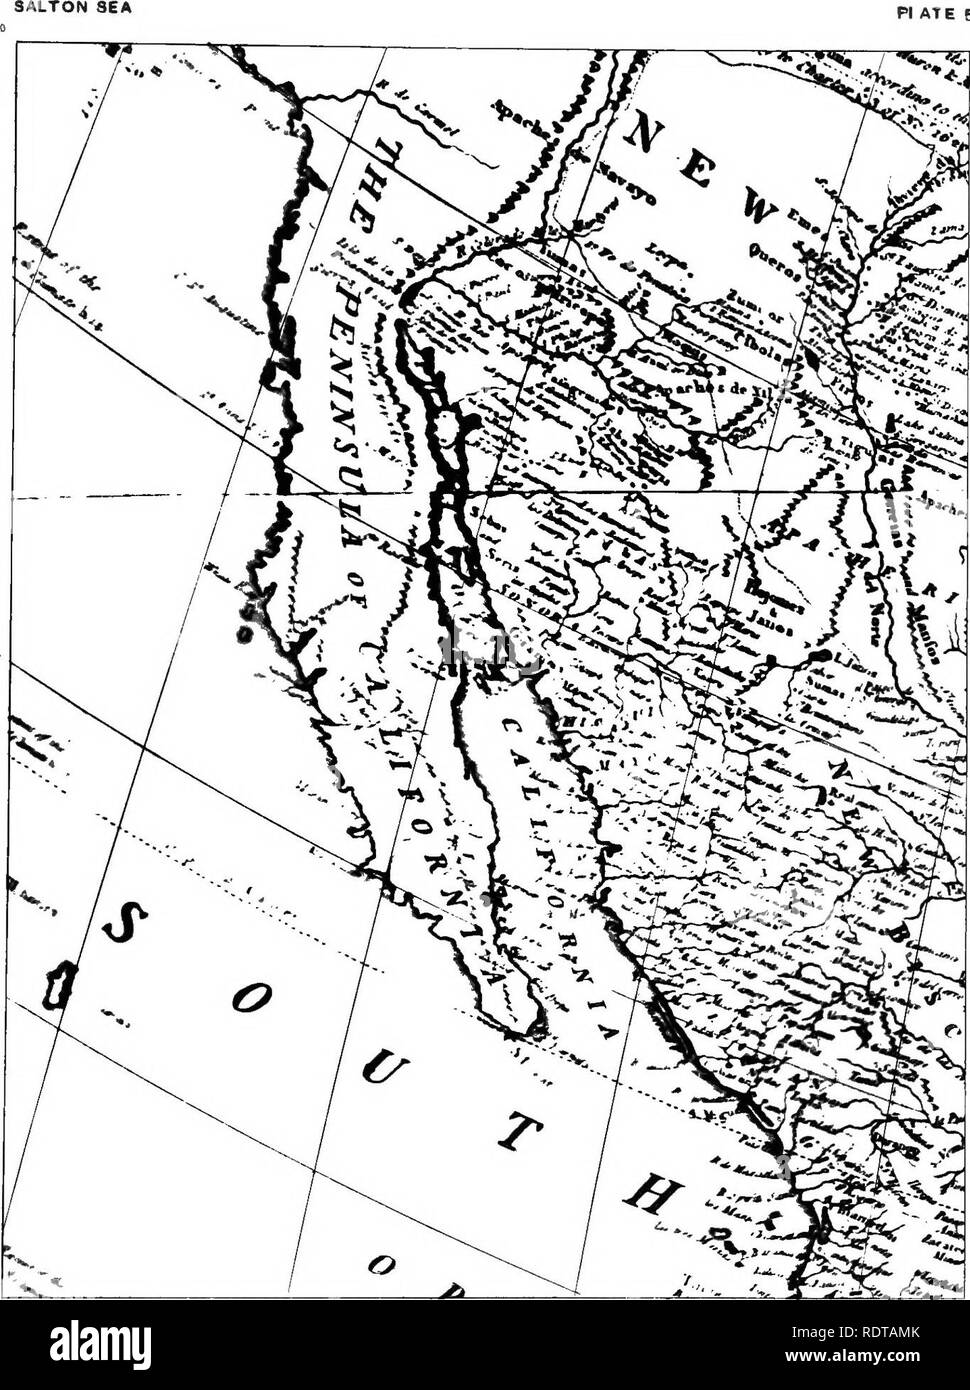 Map illustrating the geographical location of the studied sea